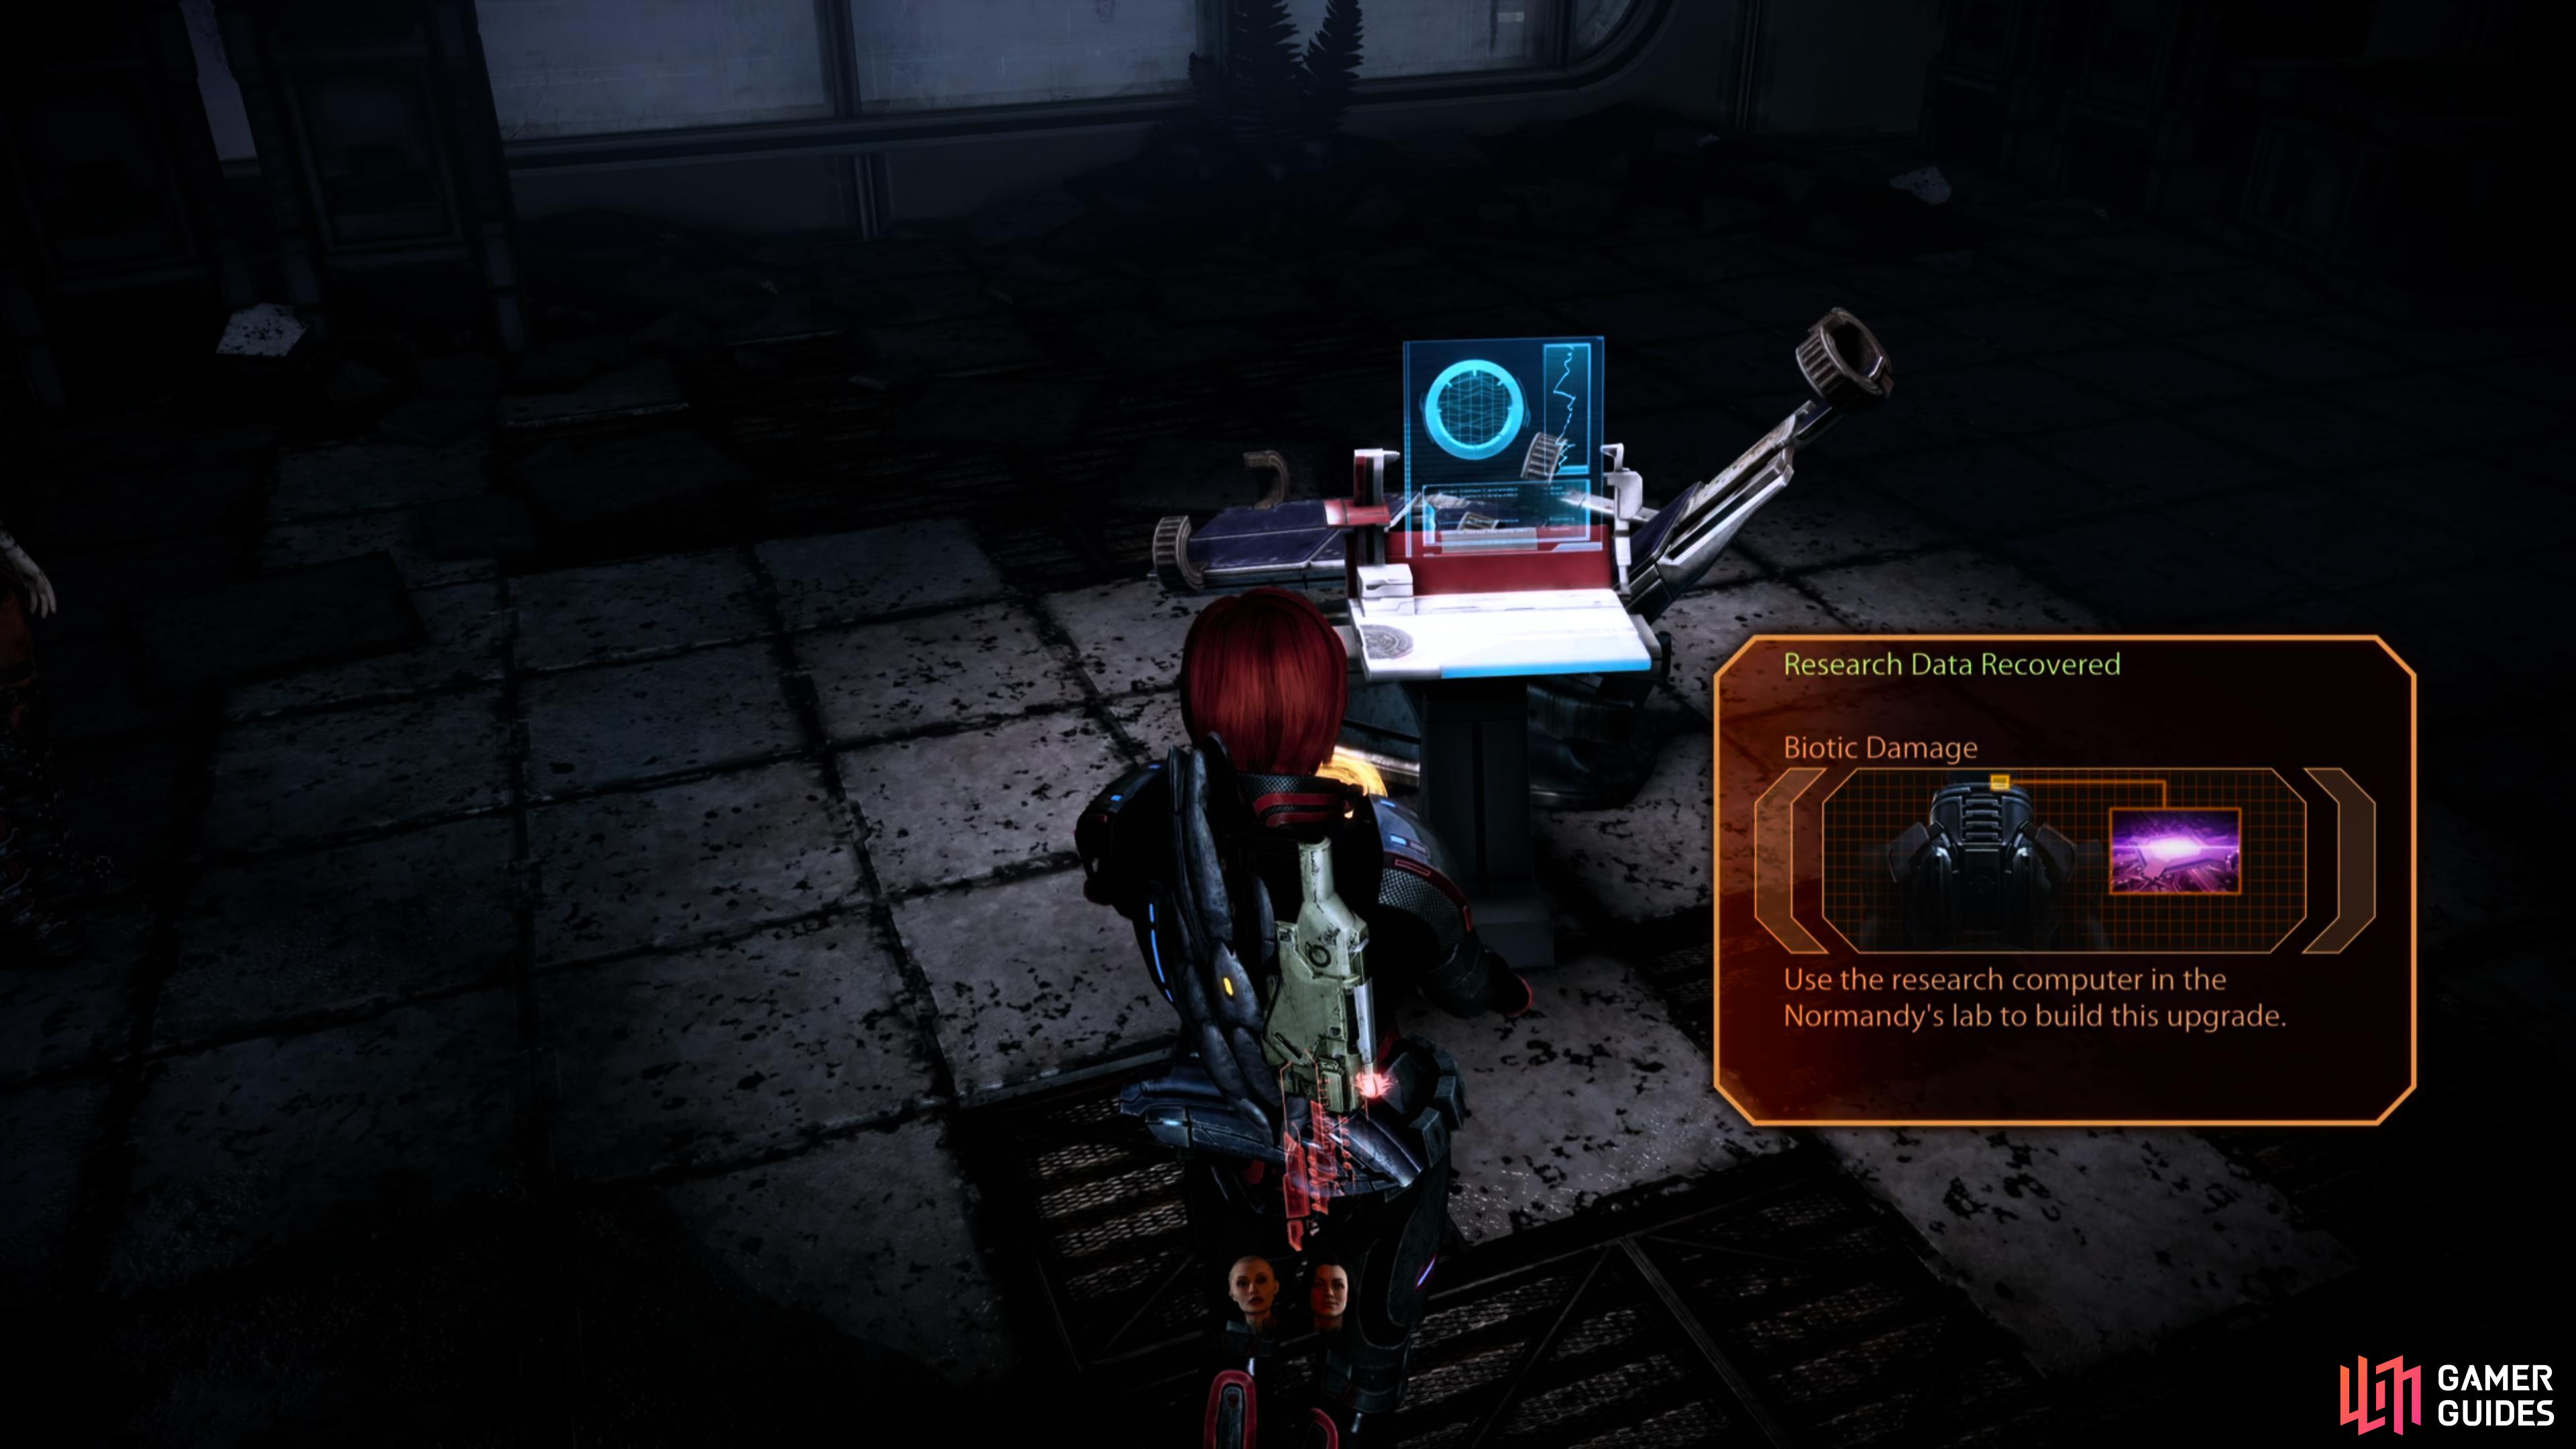 Examine another terminal to obtain a Biotic Damage research project.